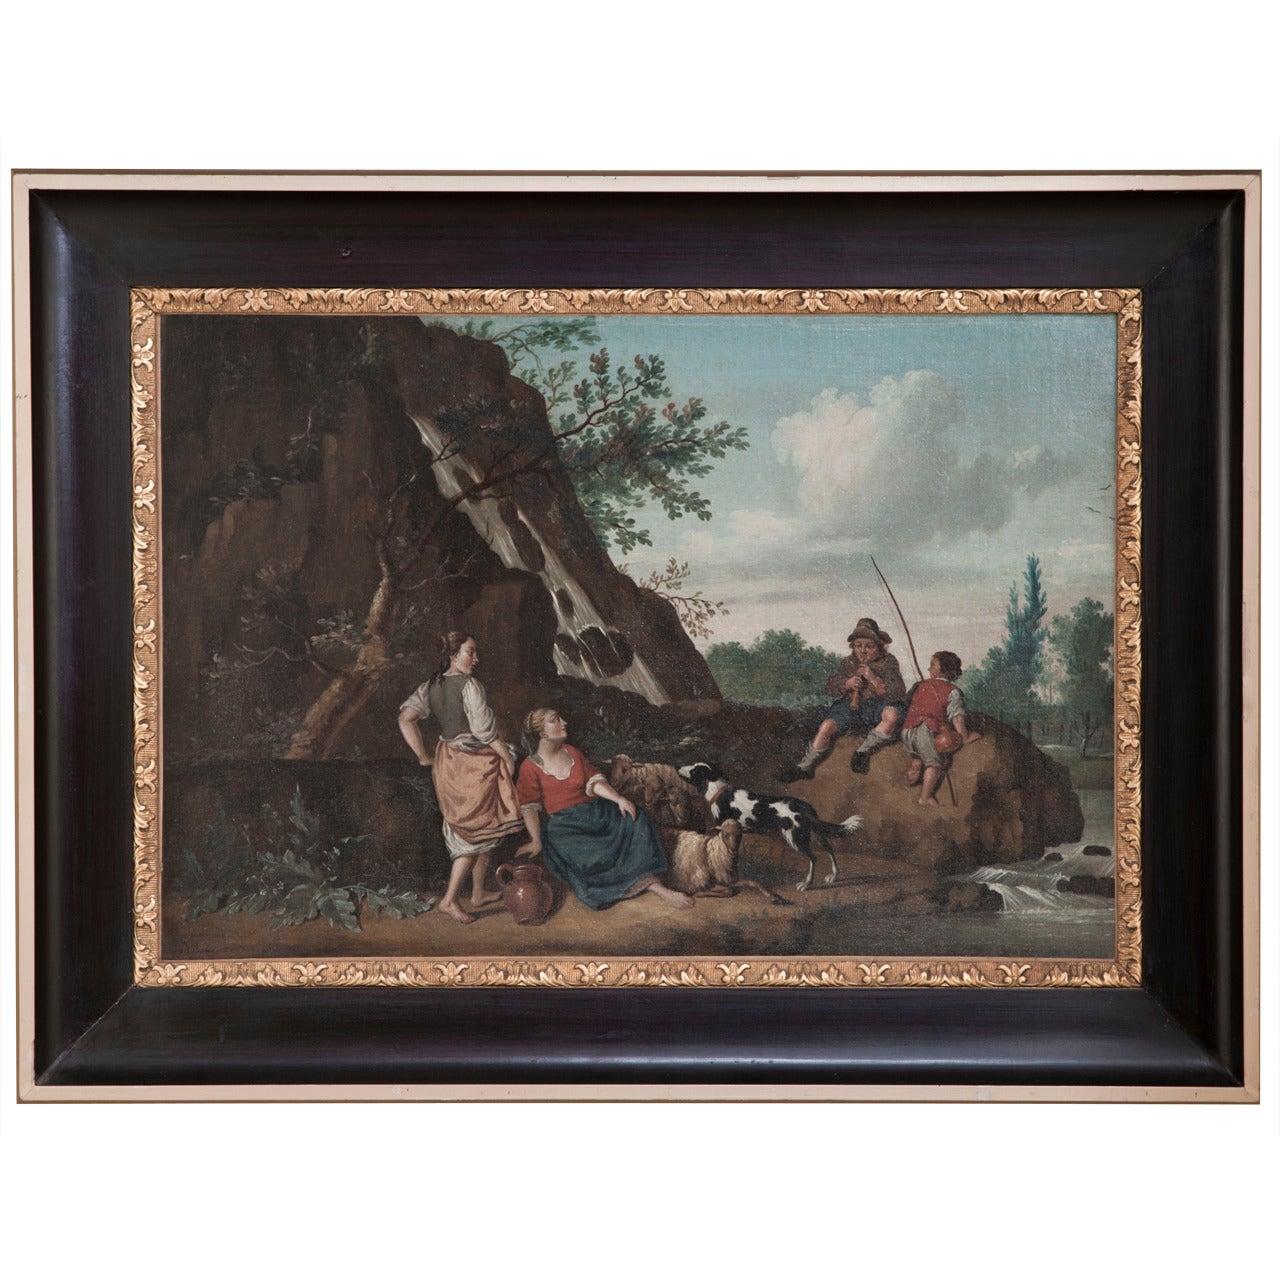 Antique 19th Century French Painting - Framed Oil on Canvas by Paul Ballaert